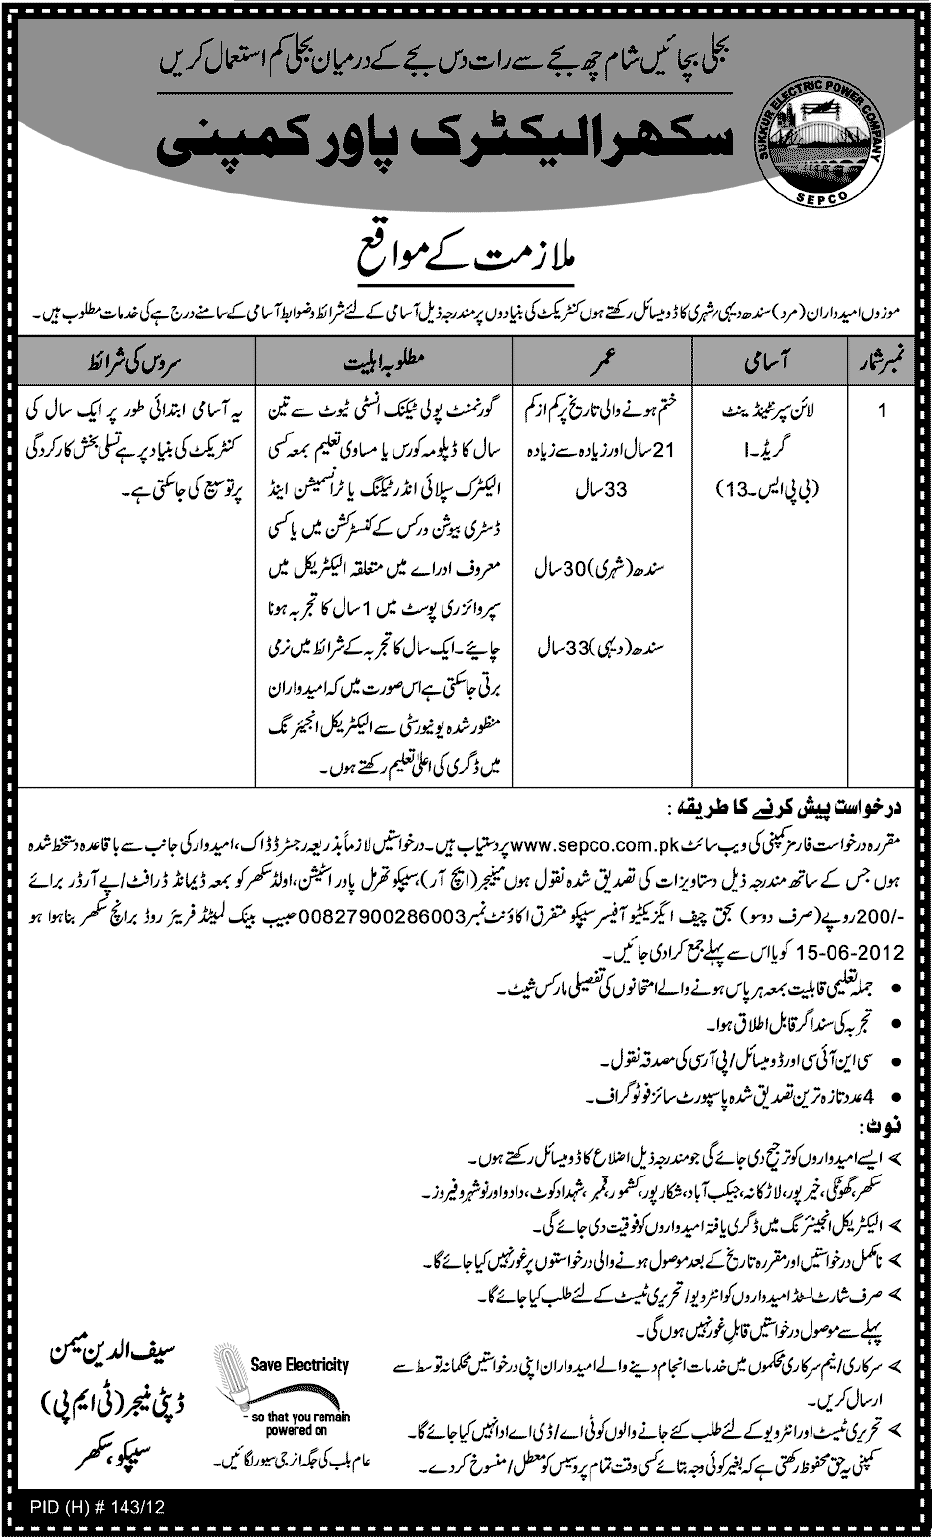 Line Superintendent Required at SEPCO (Sukkur Electric Power Company)